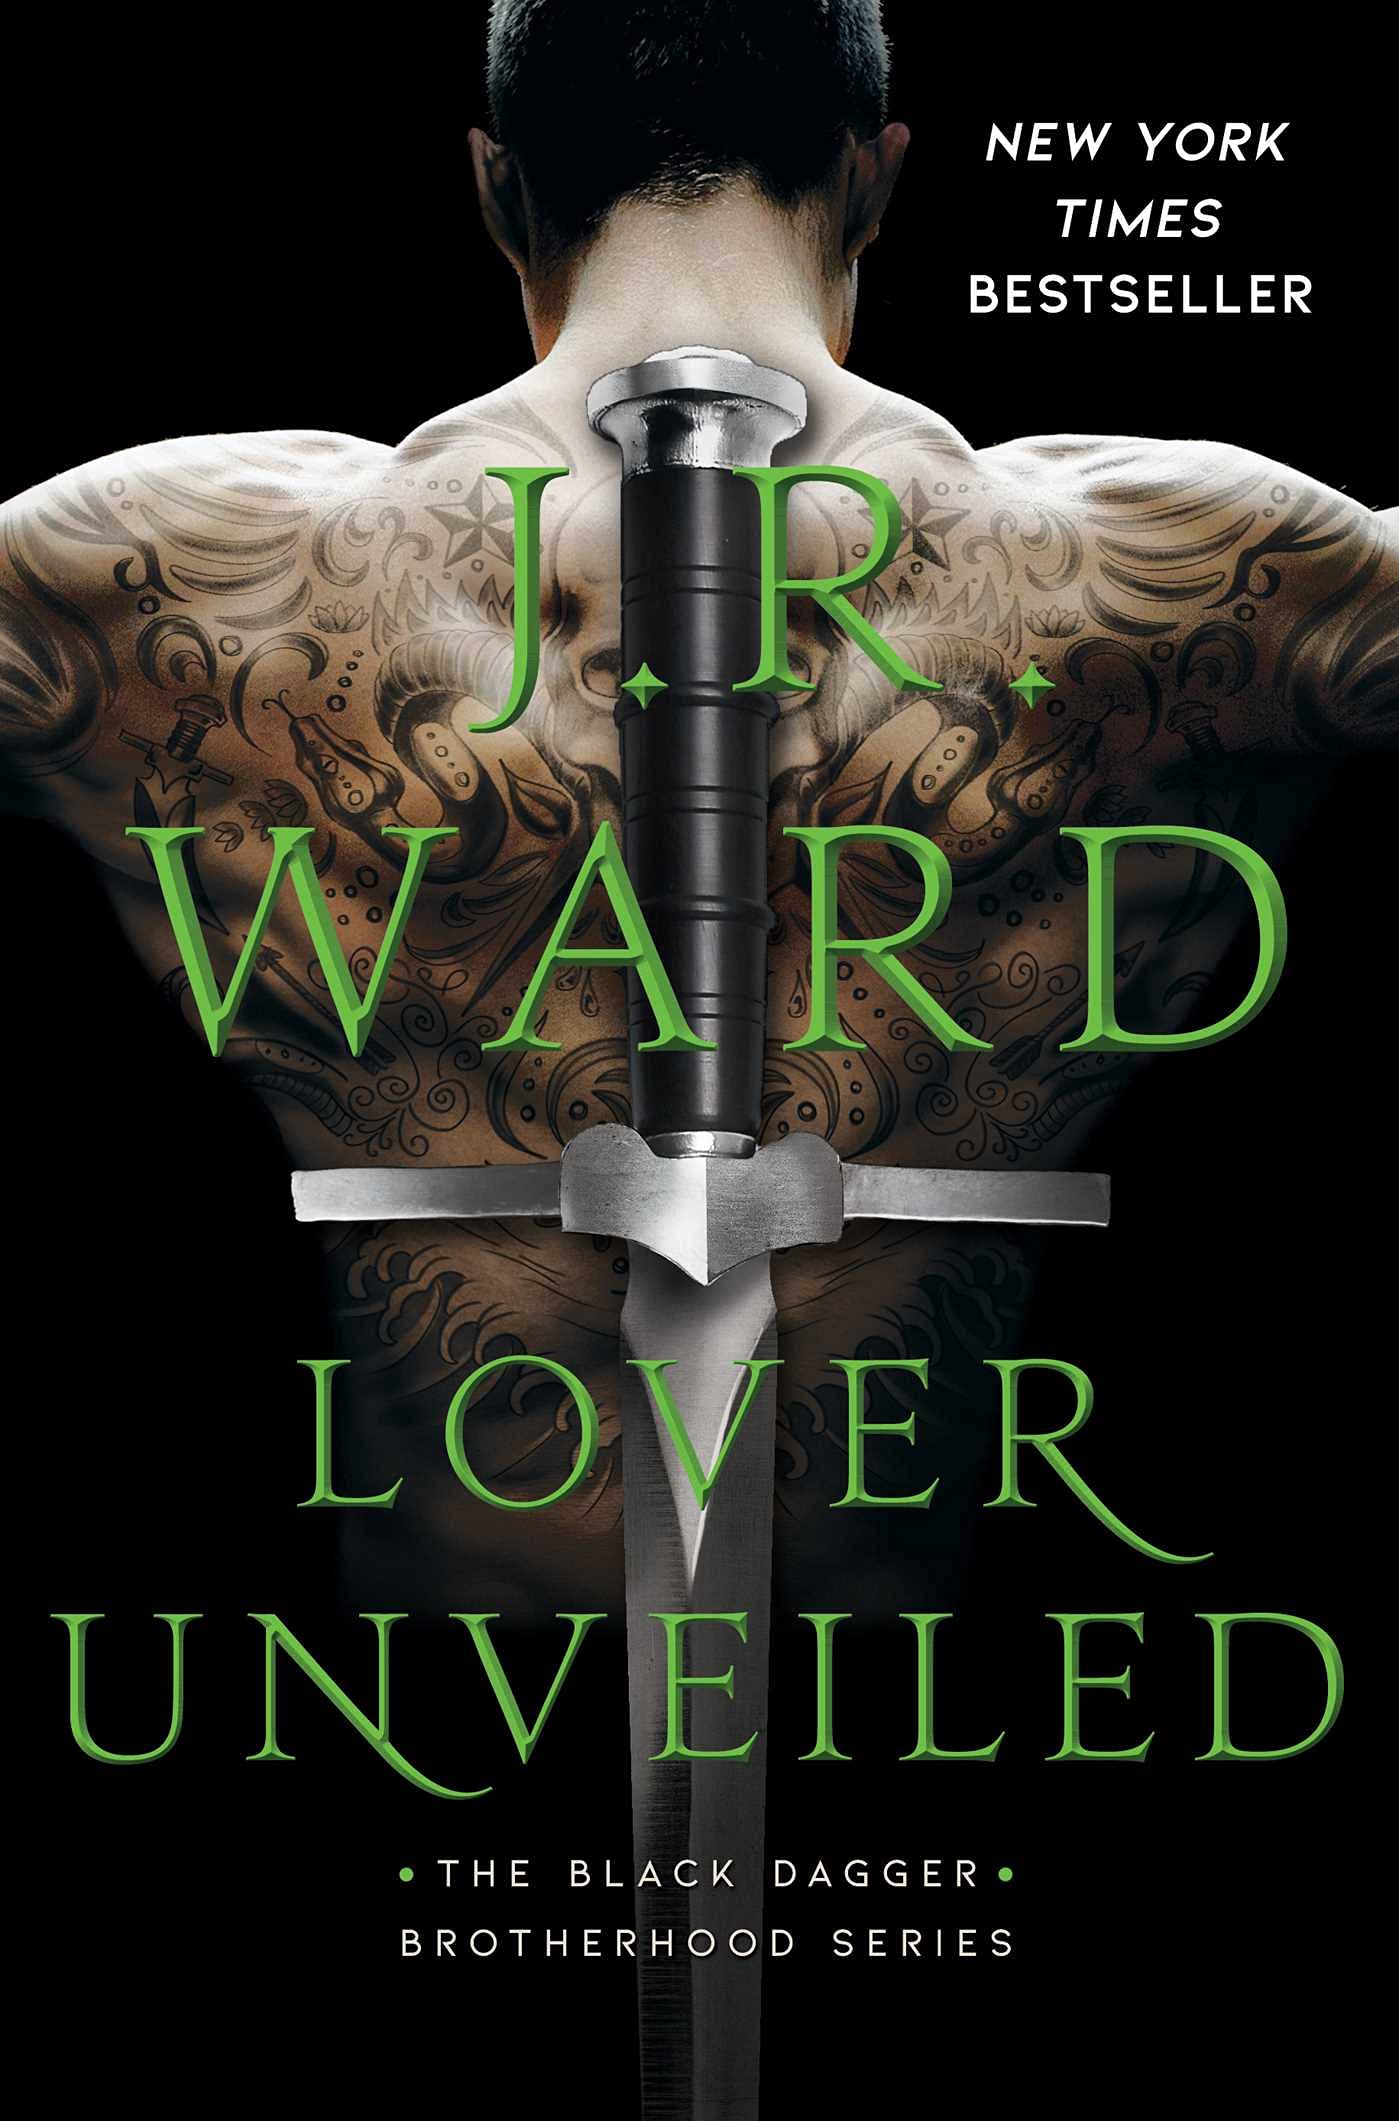 “Lover unveiled” – J.R. Ward